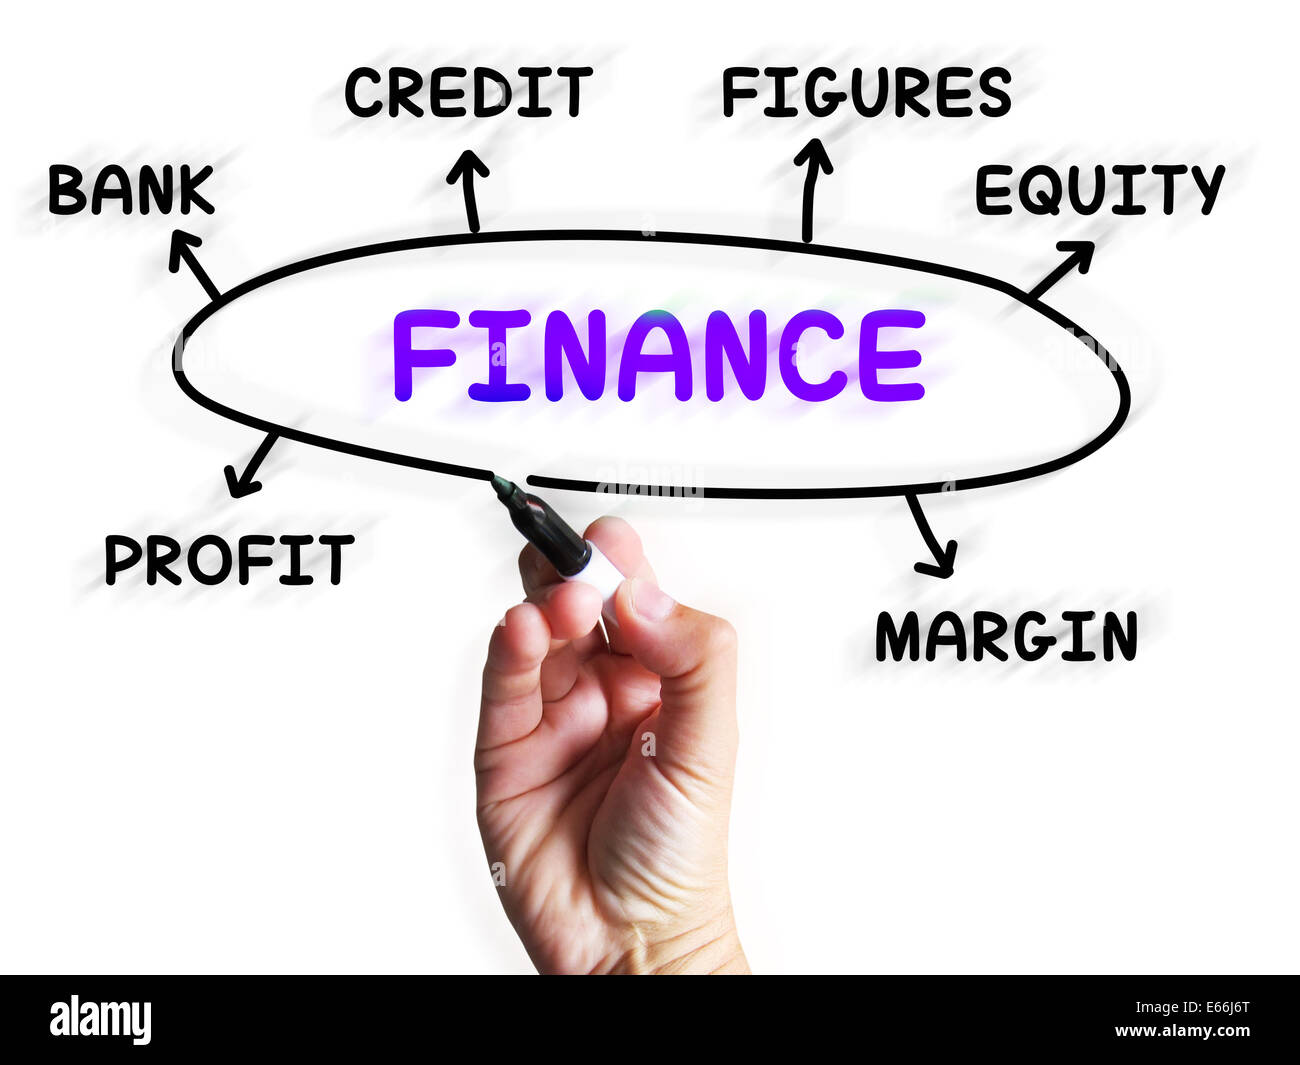 Finance Diagram Displaying Credit Equity And Margin Stock Photo